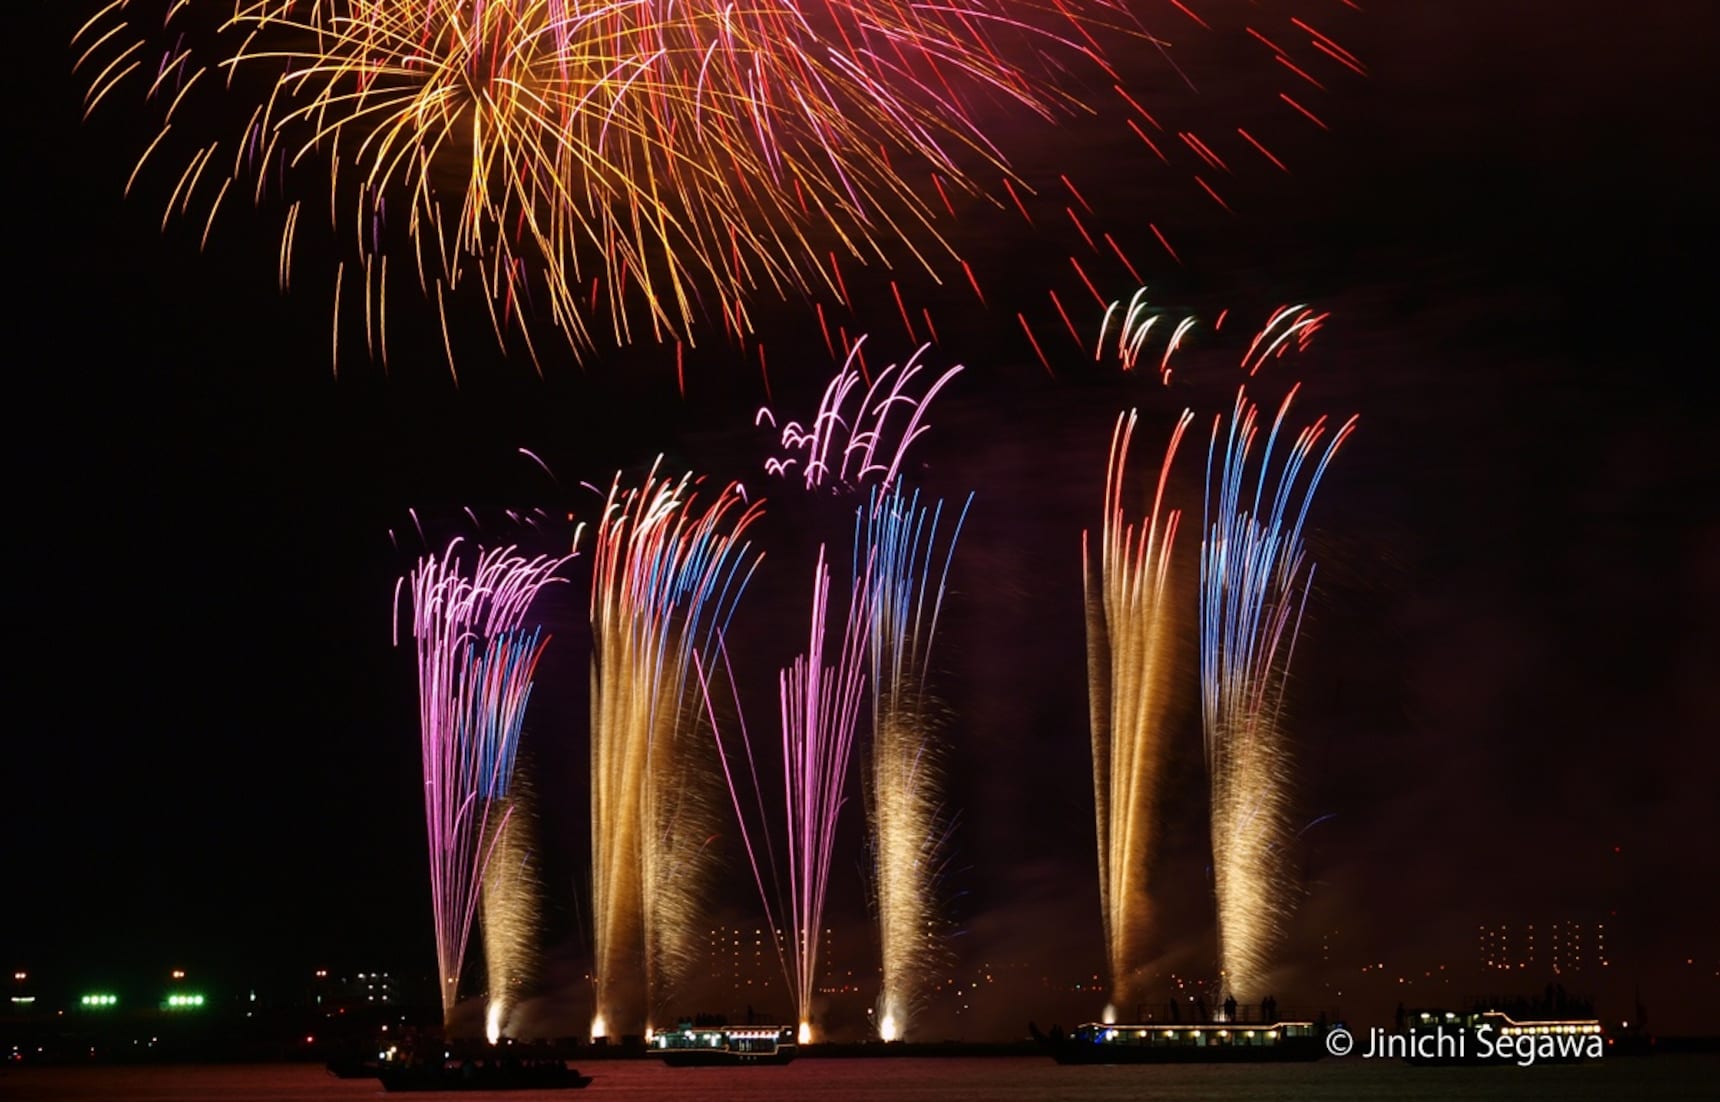 How to Get the Most Out of Fireworks in Japan